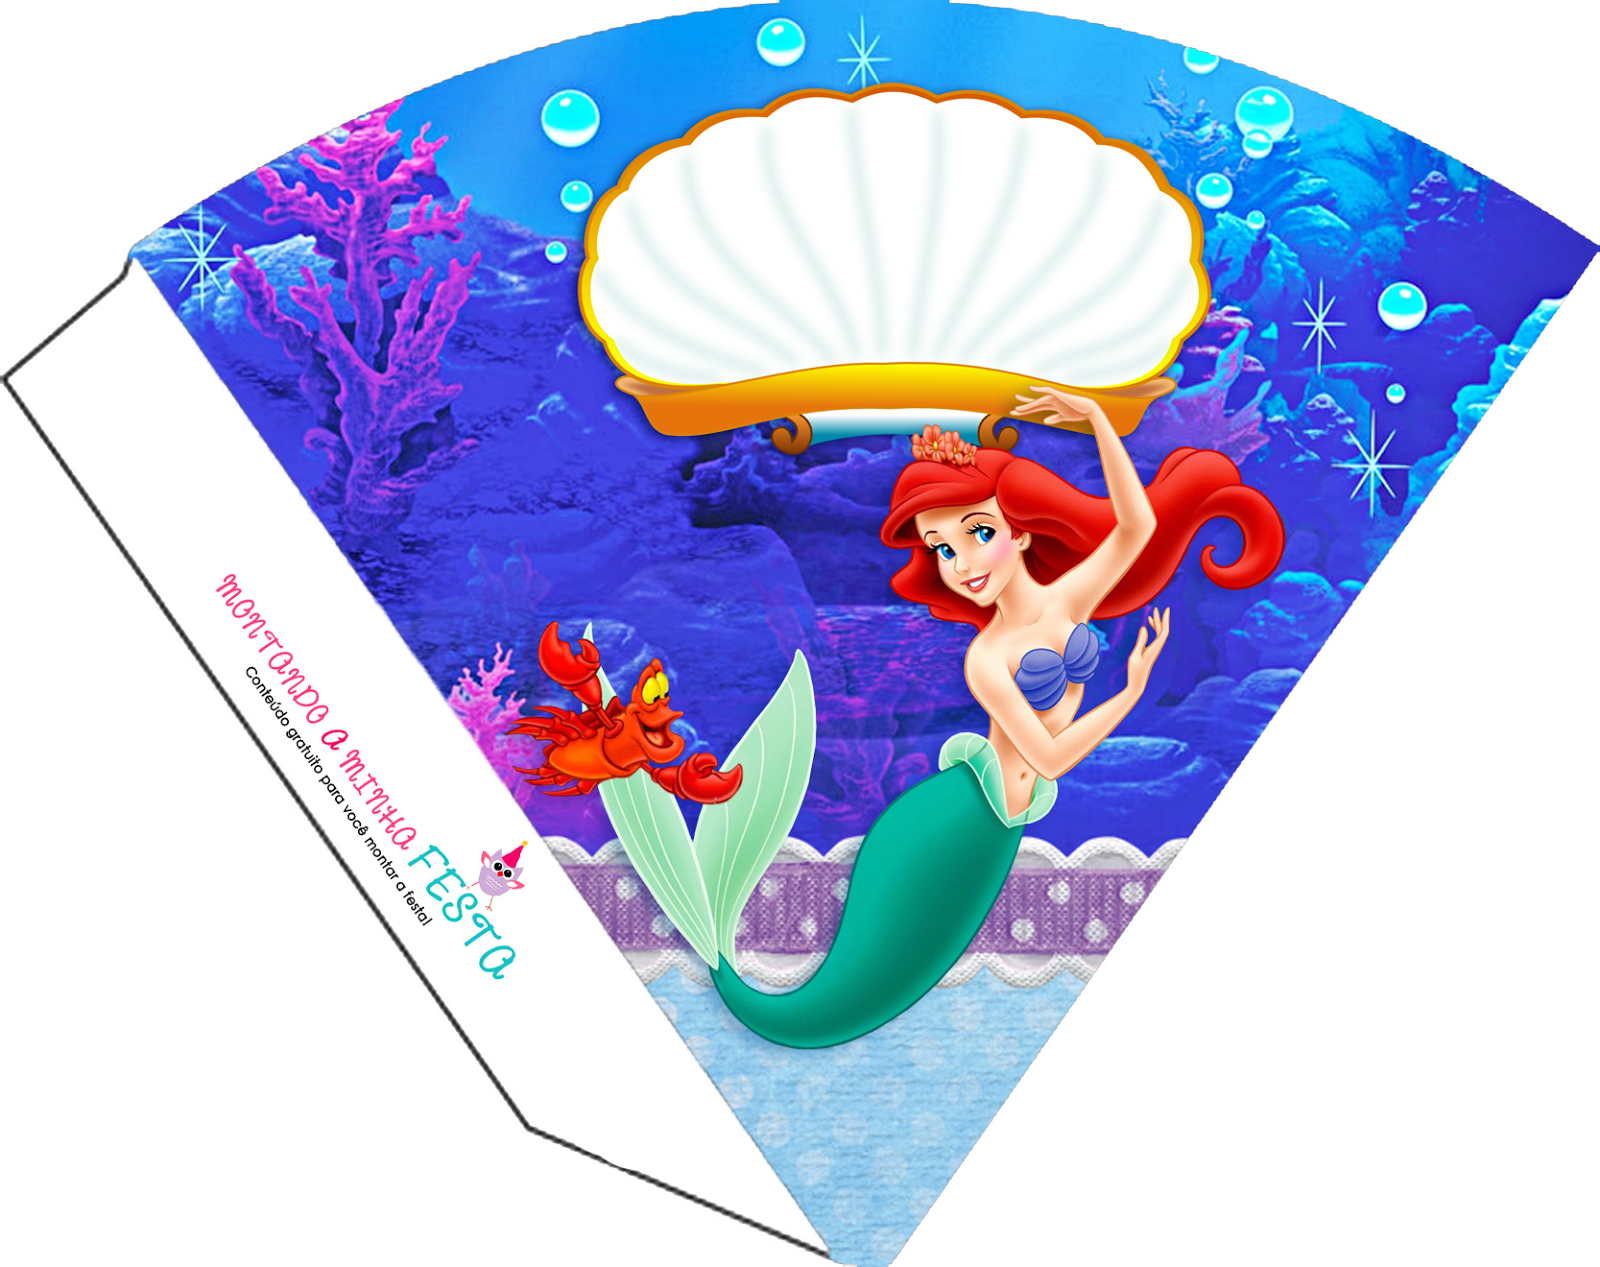 The Little Mermaid Birthday: Free Party Printables. - Oh My Fiesta - Free Printable Little Mermaid Birthday Banner